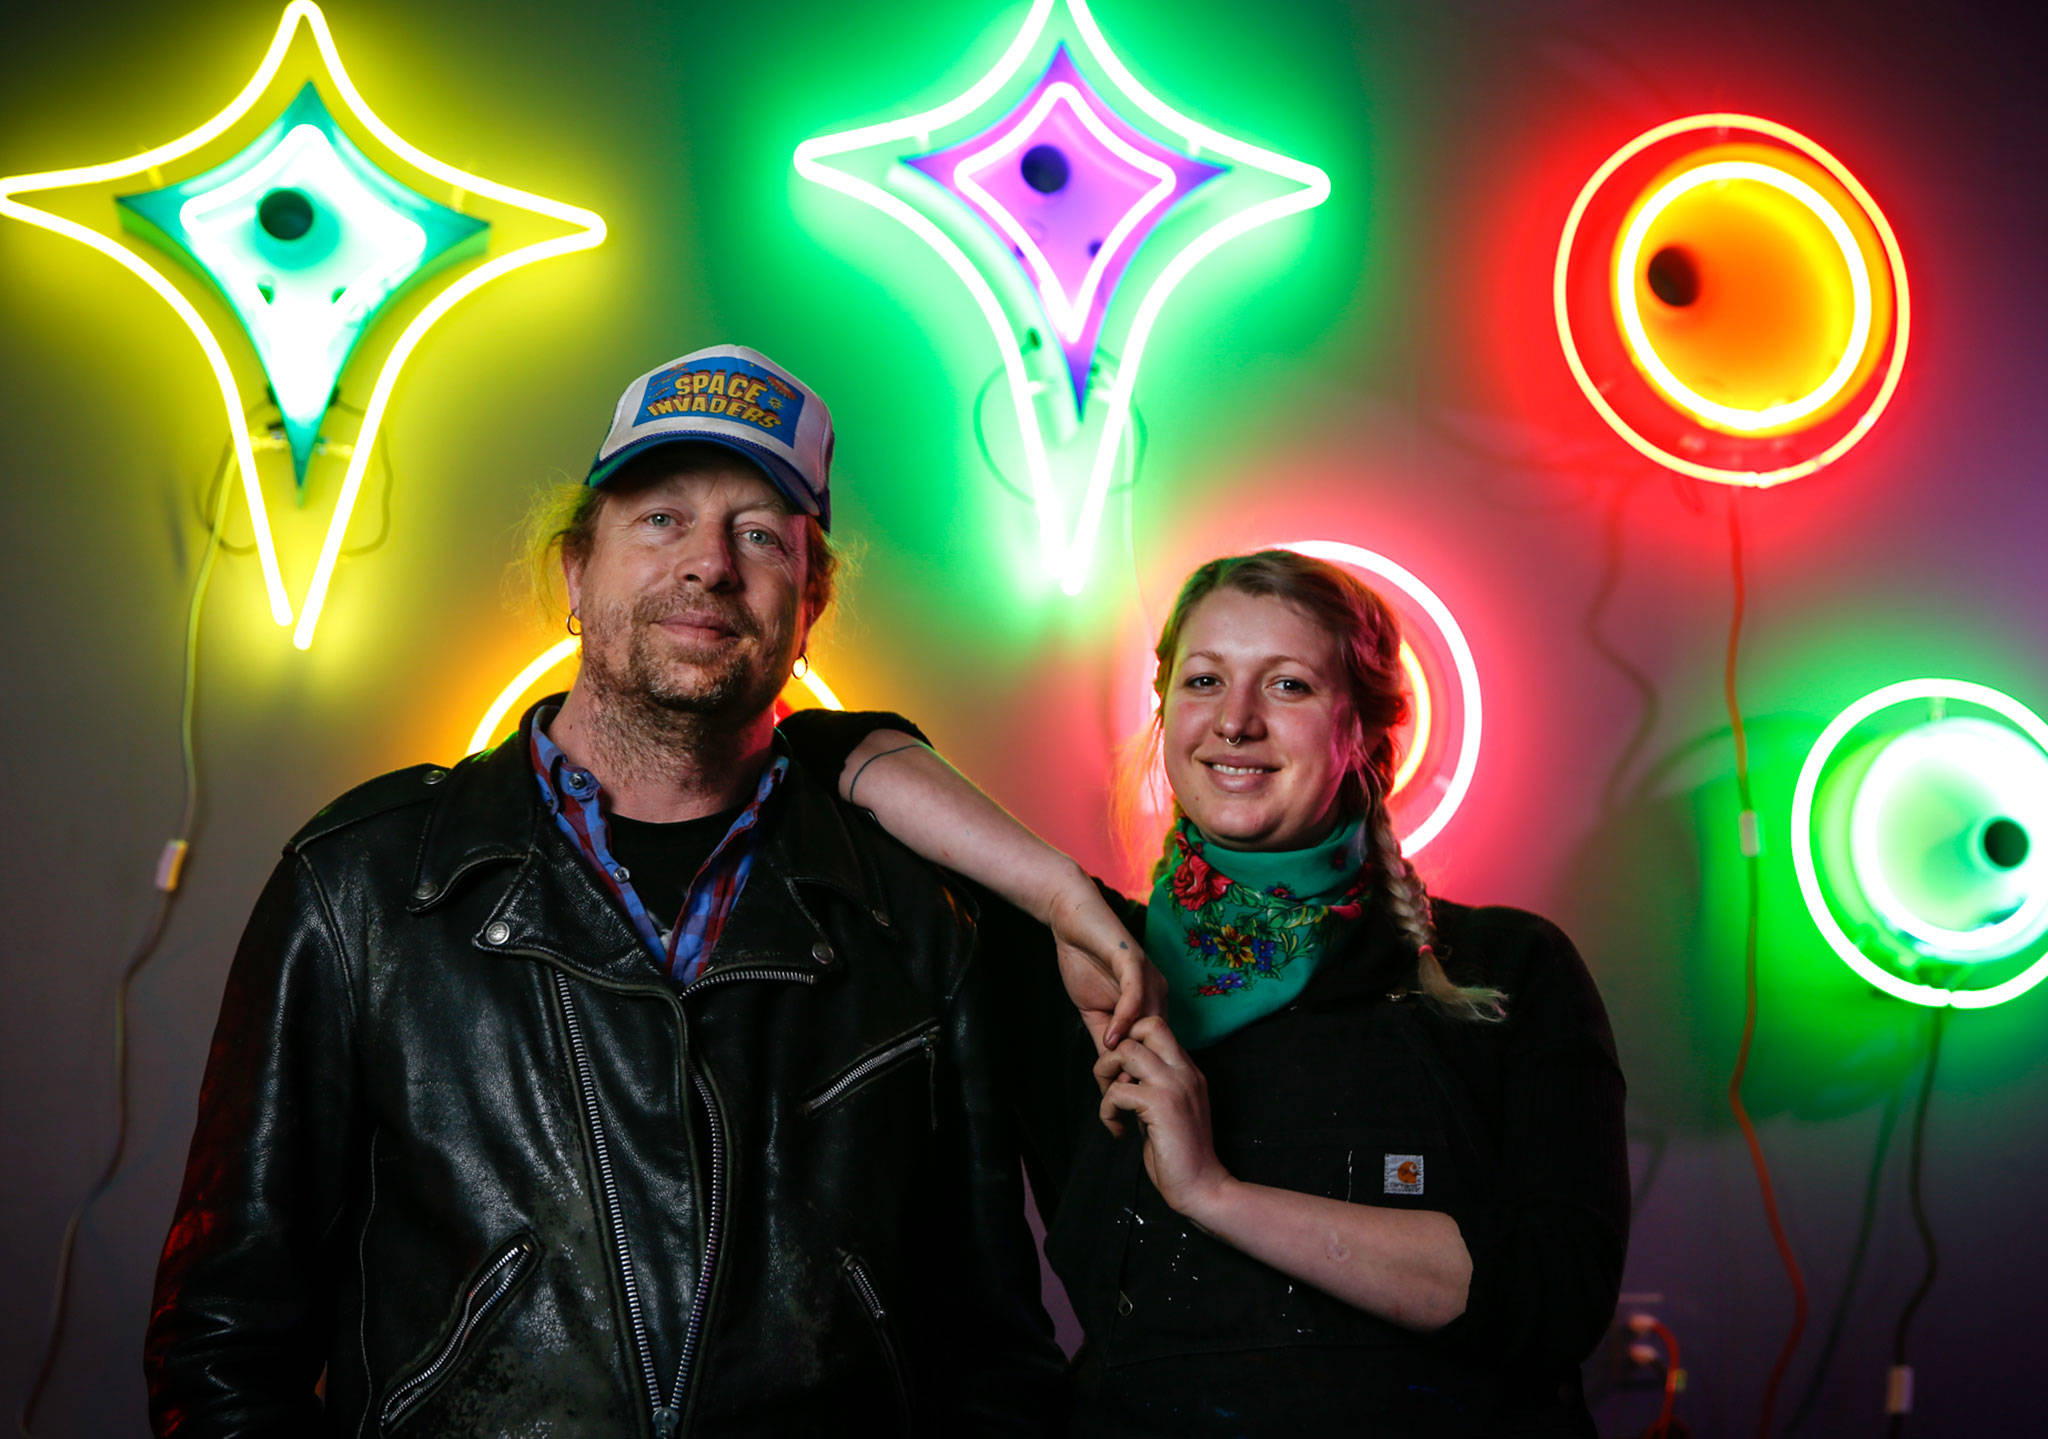 Neon artist Tim Leonard (left), owner of The Machine Shop arcade in Langley, spent much of the pandemic making art pieces and teaching the craft to his daughter Sage Leonard. The neon art is on display at the arcade through June. (Kevin Clark / The Herald)